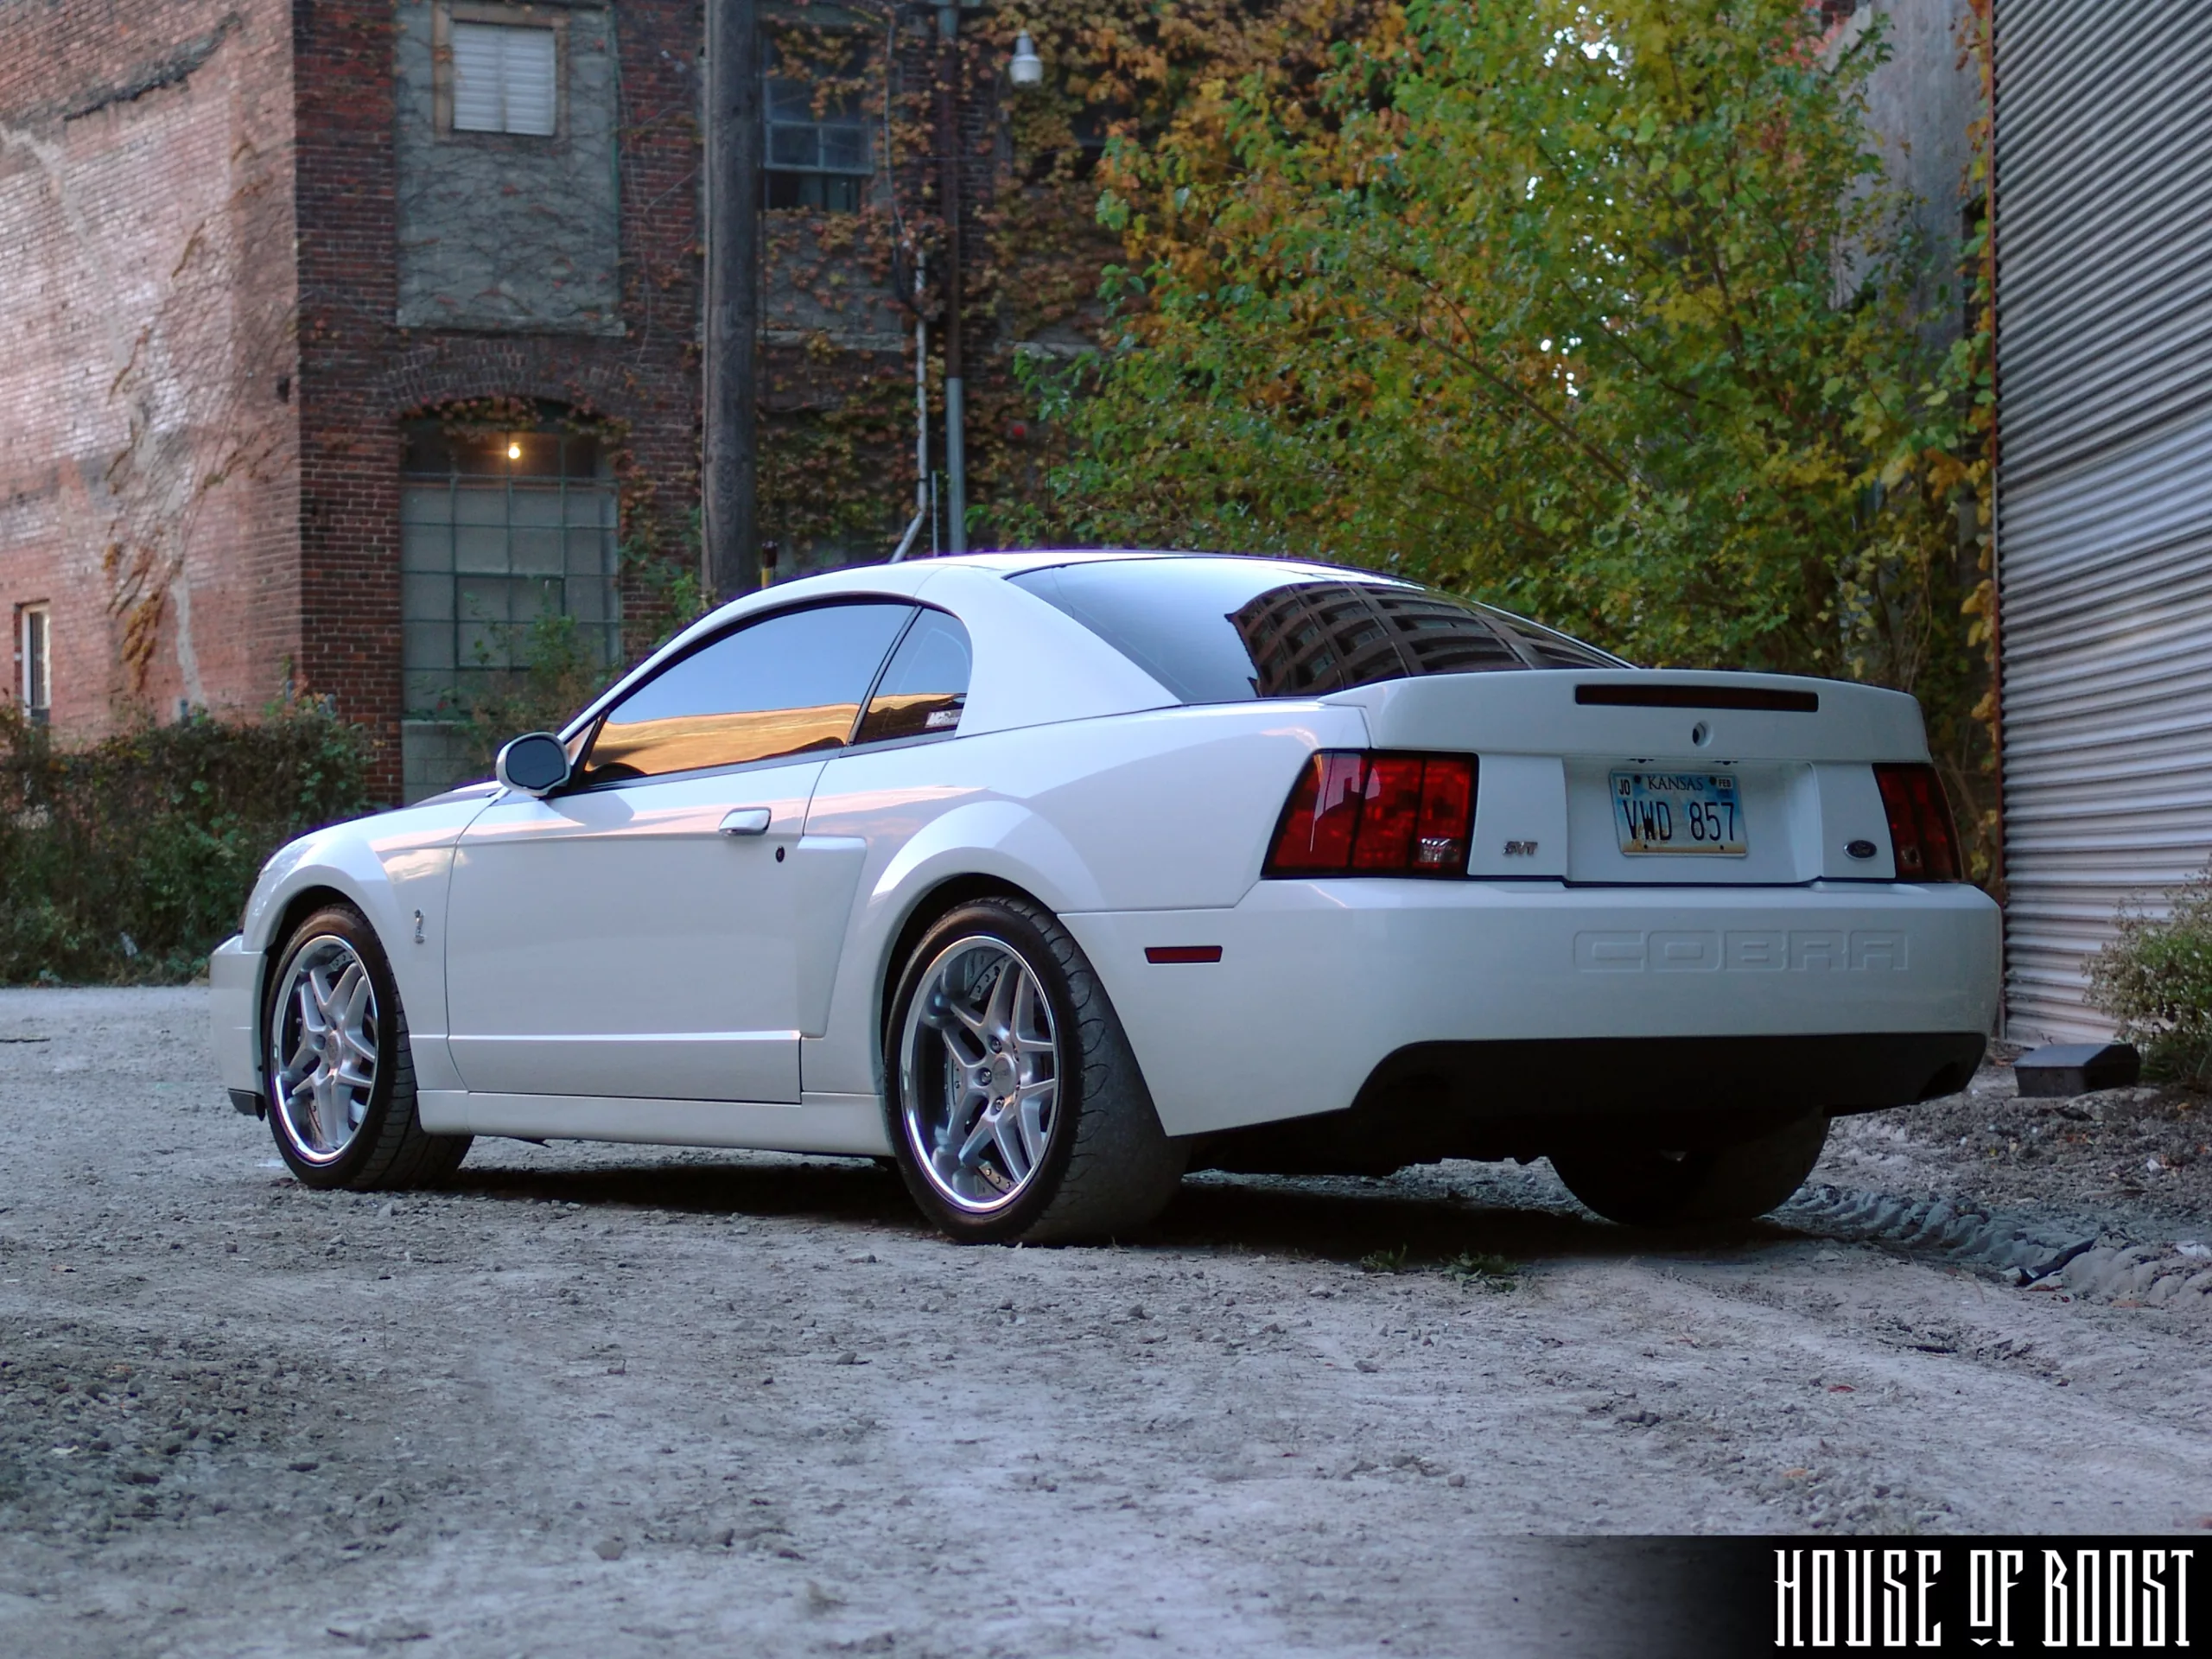 House of Boost built ProCharged Ford Mustang Cobra in white rear quarter panel